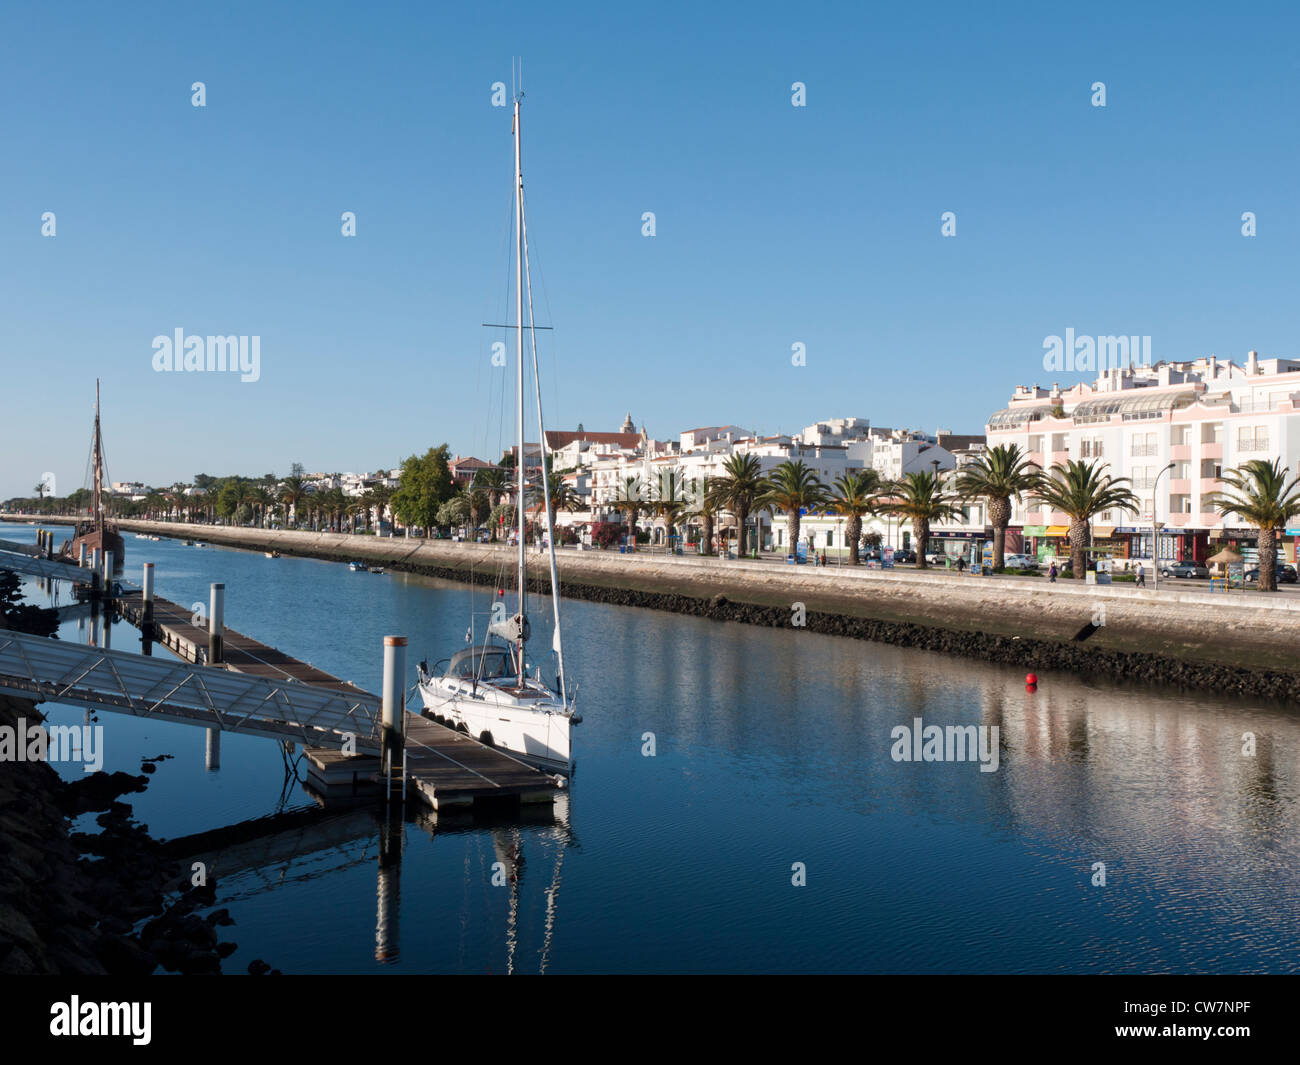 Boat docked on the Ribeira de Bensafrim leading to the marine at Lagos, Portugal. Stock Photo